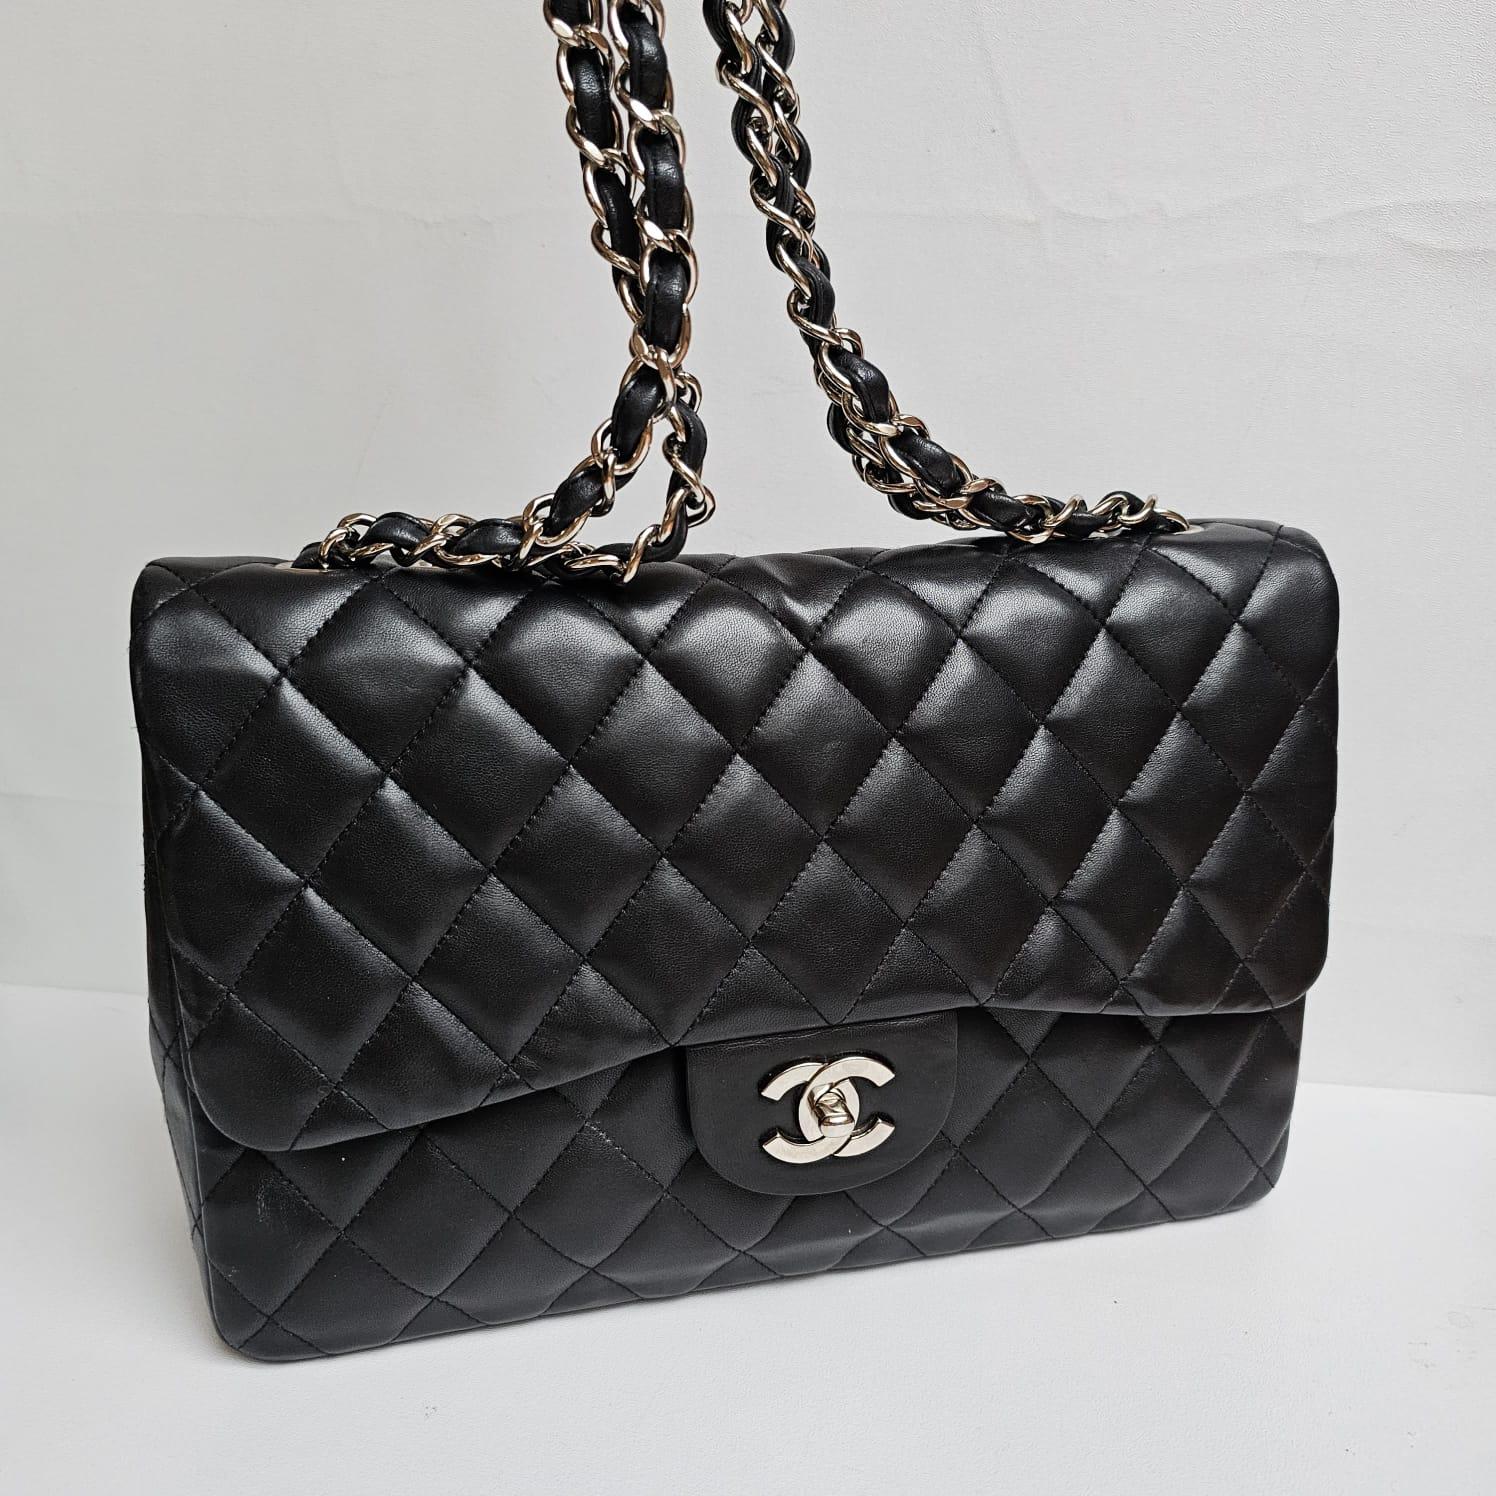 Chanel Black Lambskin Quilted Jumbo Single Flap Bag For Sale 6